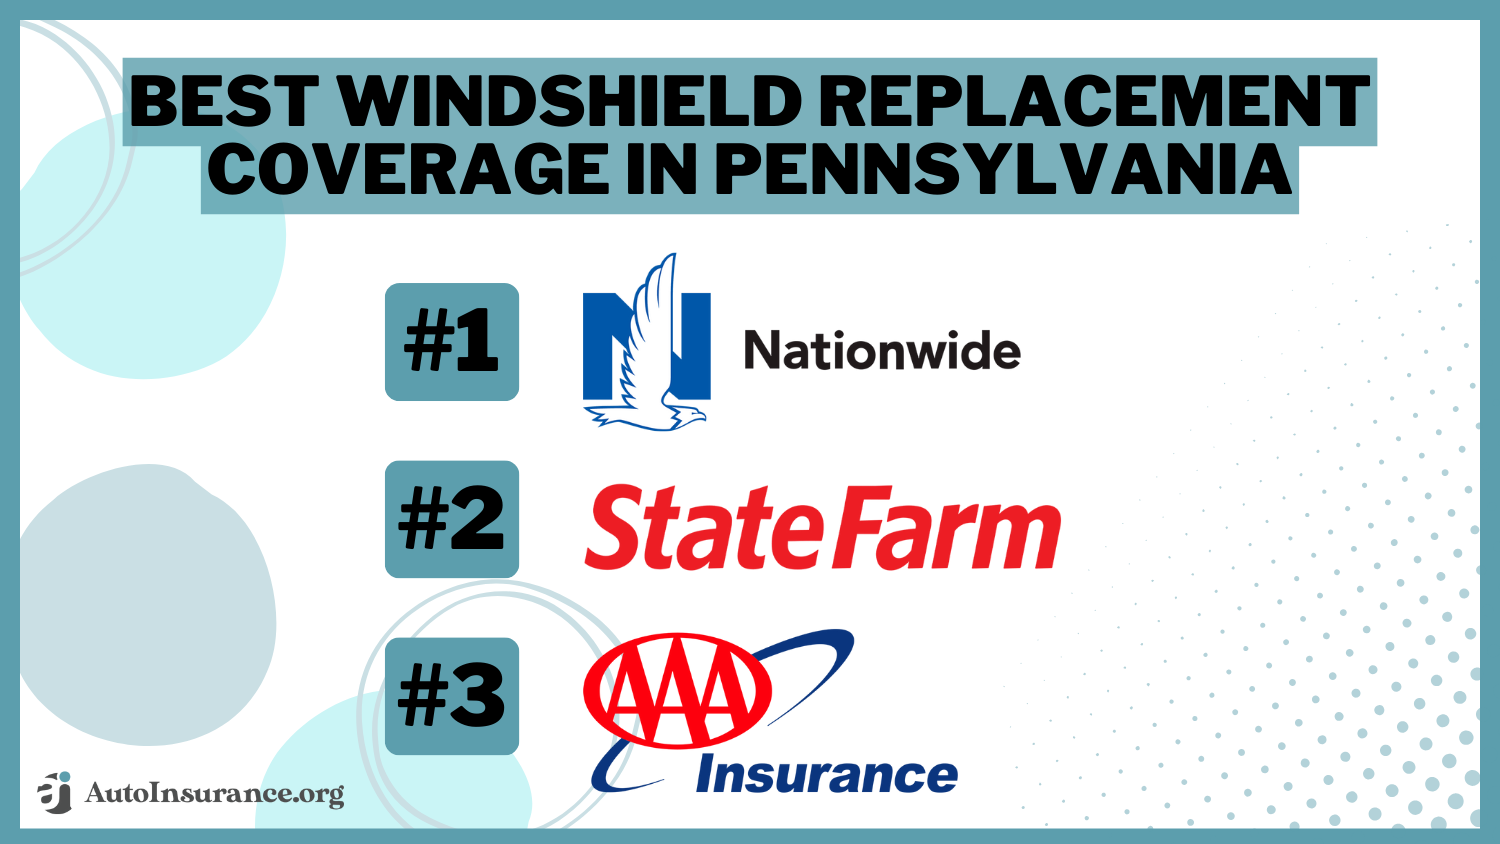 Best Windshield Replacement Coverage in Pennsylvania: Nationwide, State Farm, and AAA